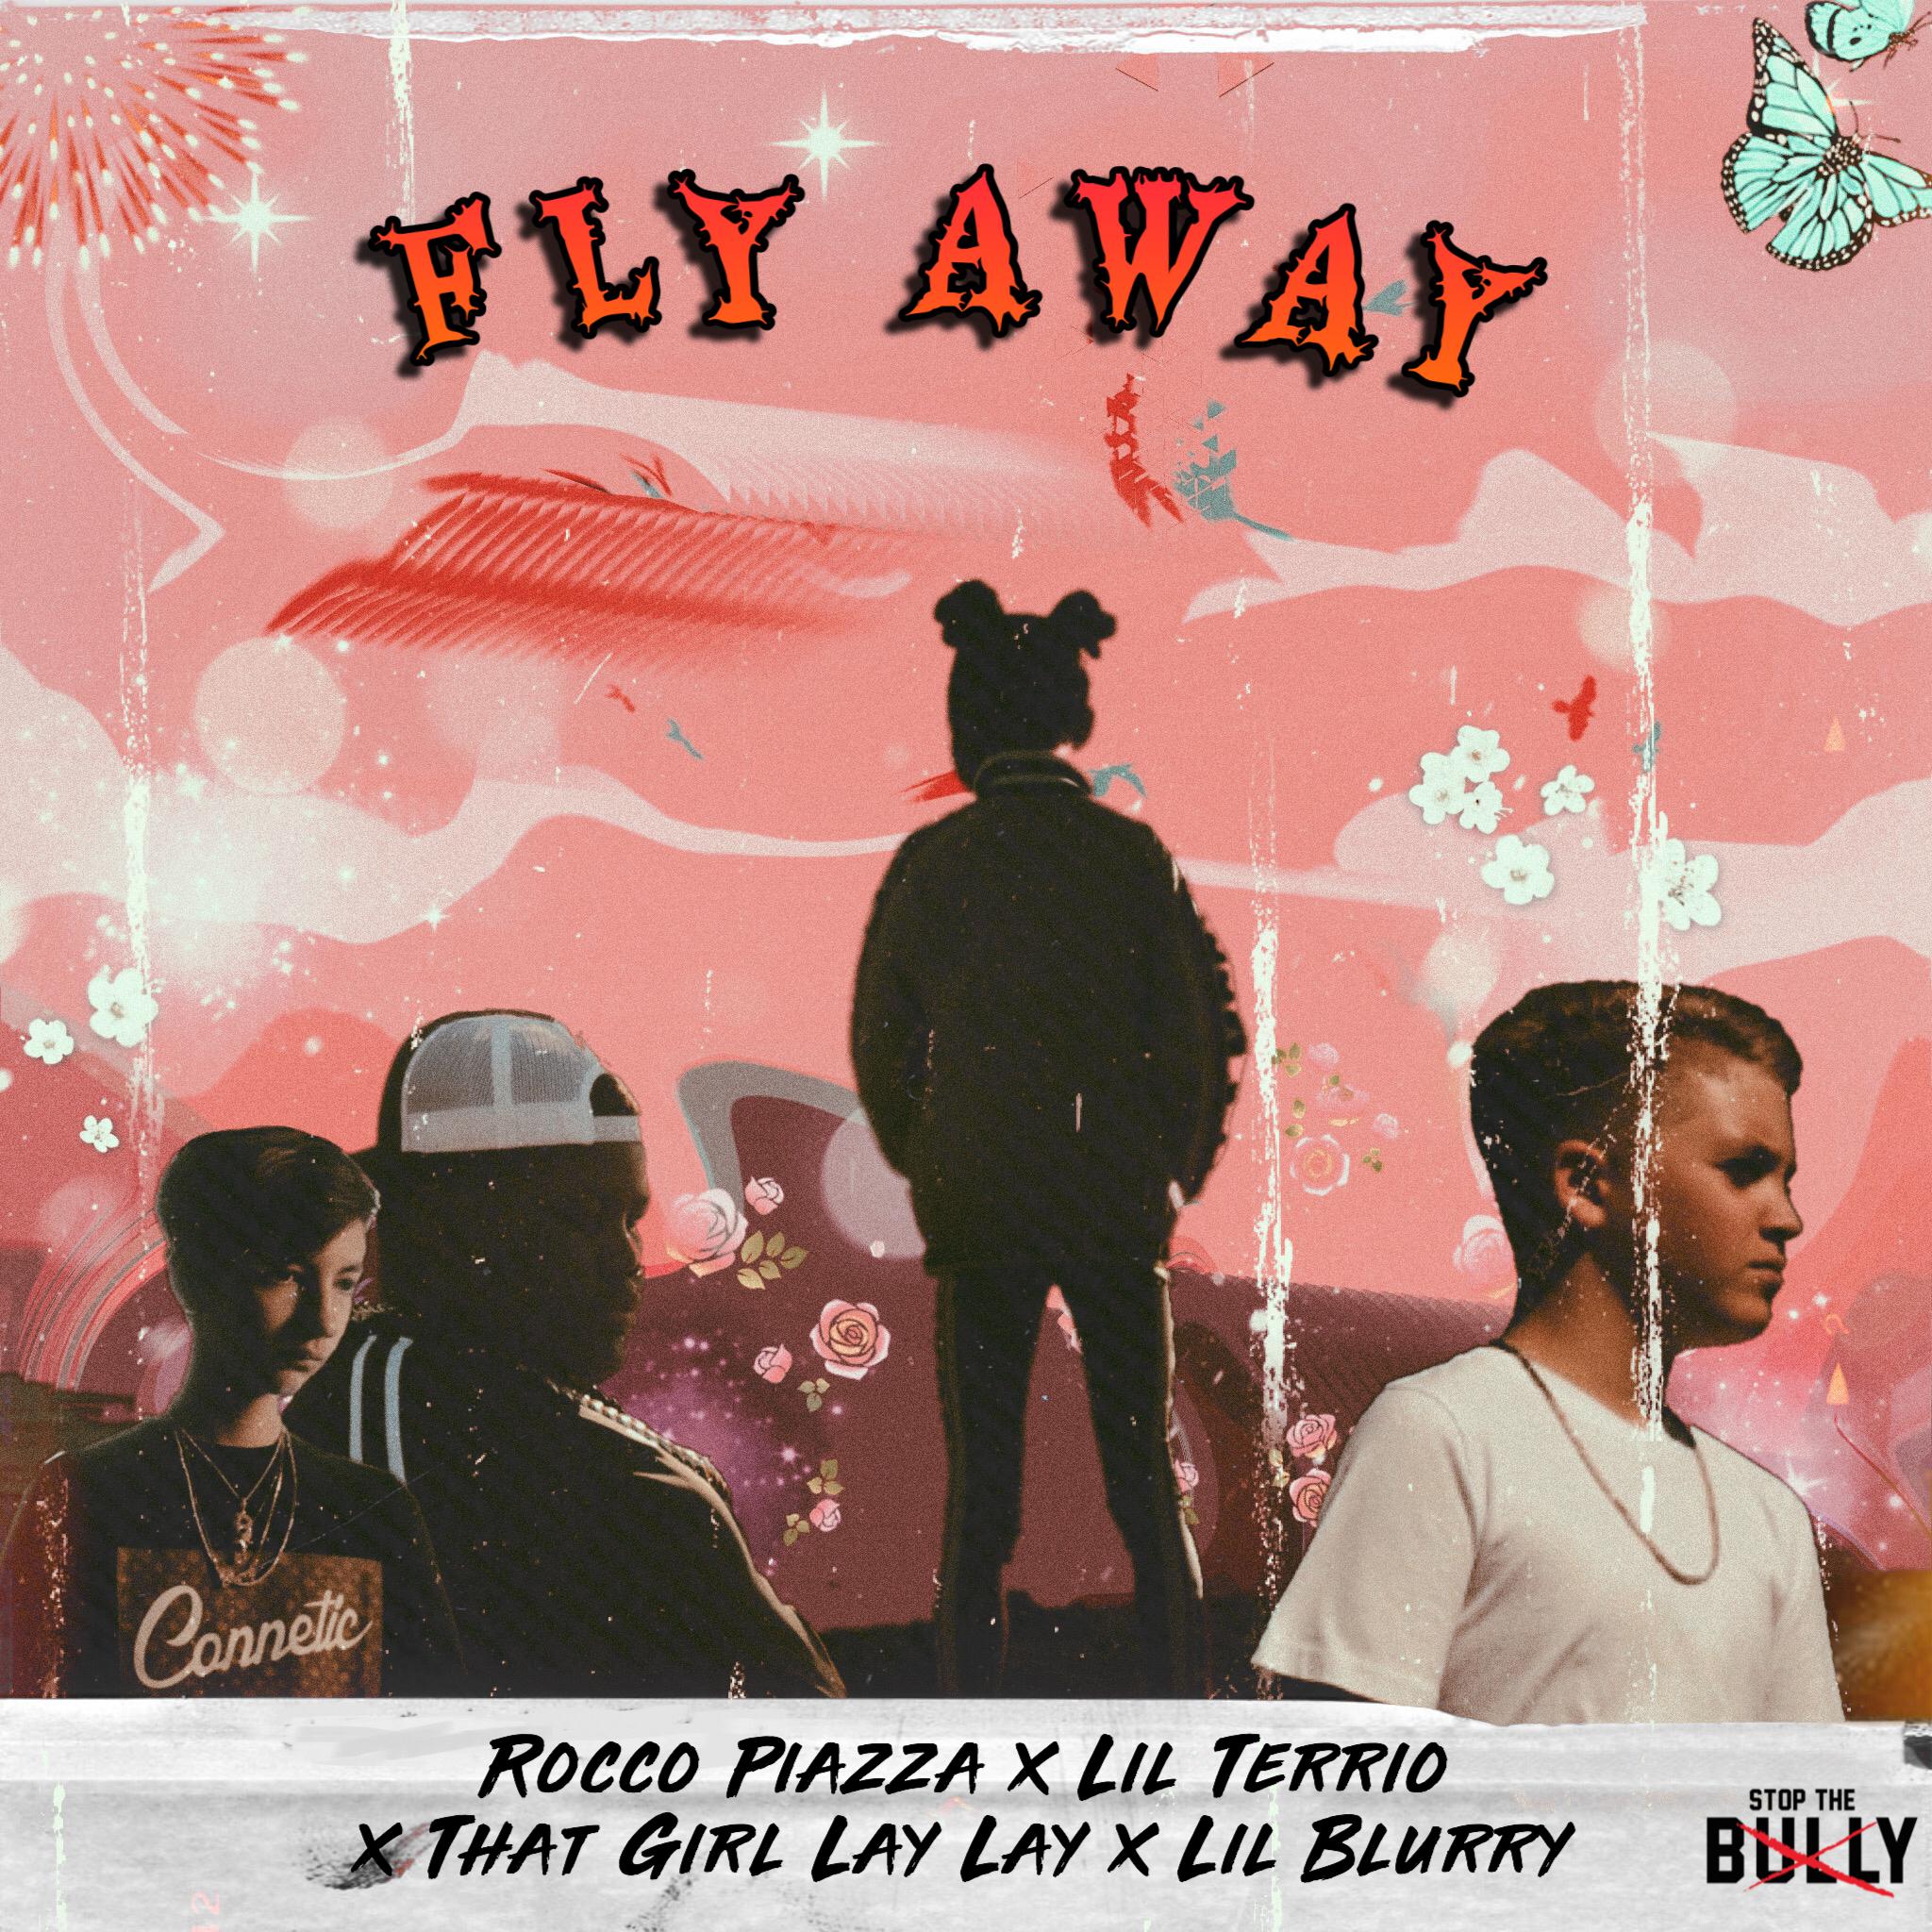 Rocco Piazza - Fly Away